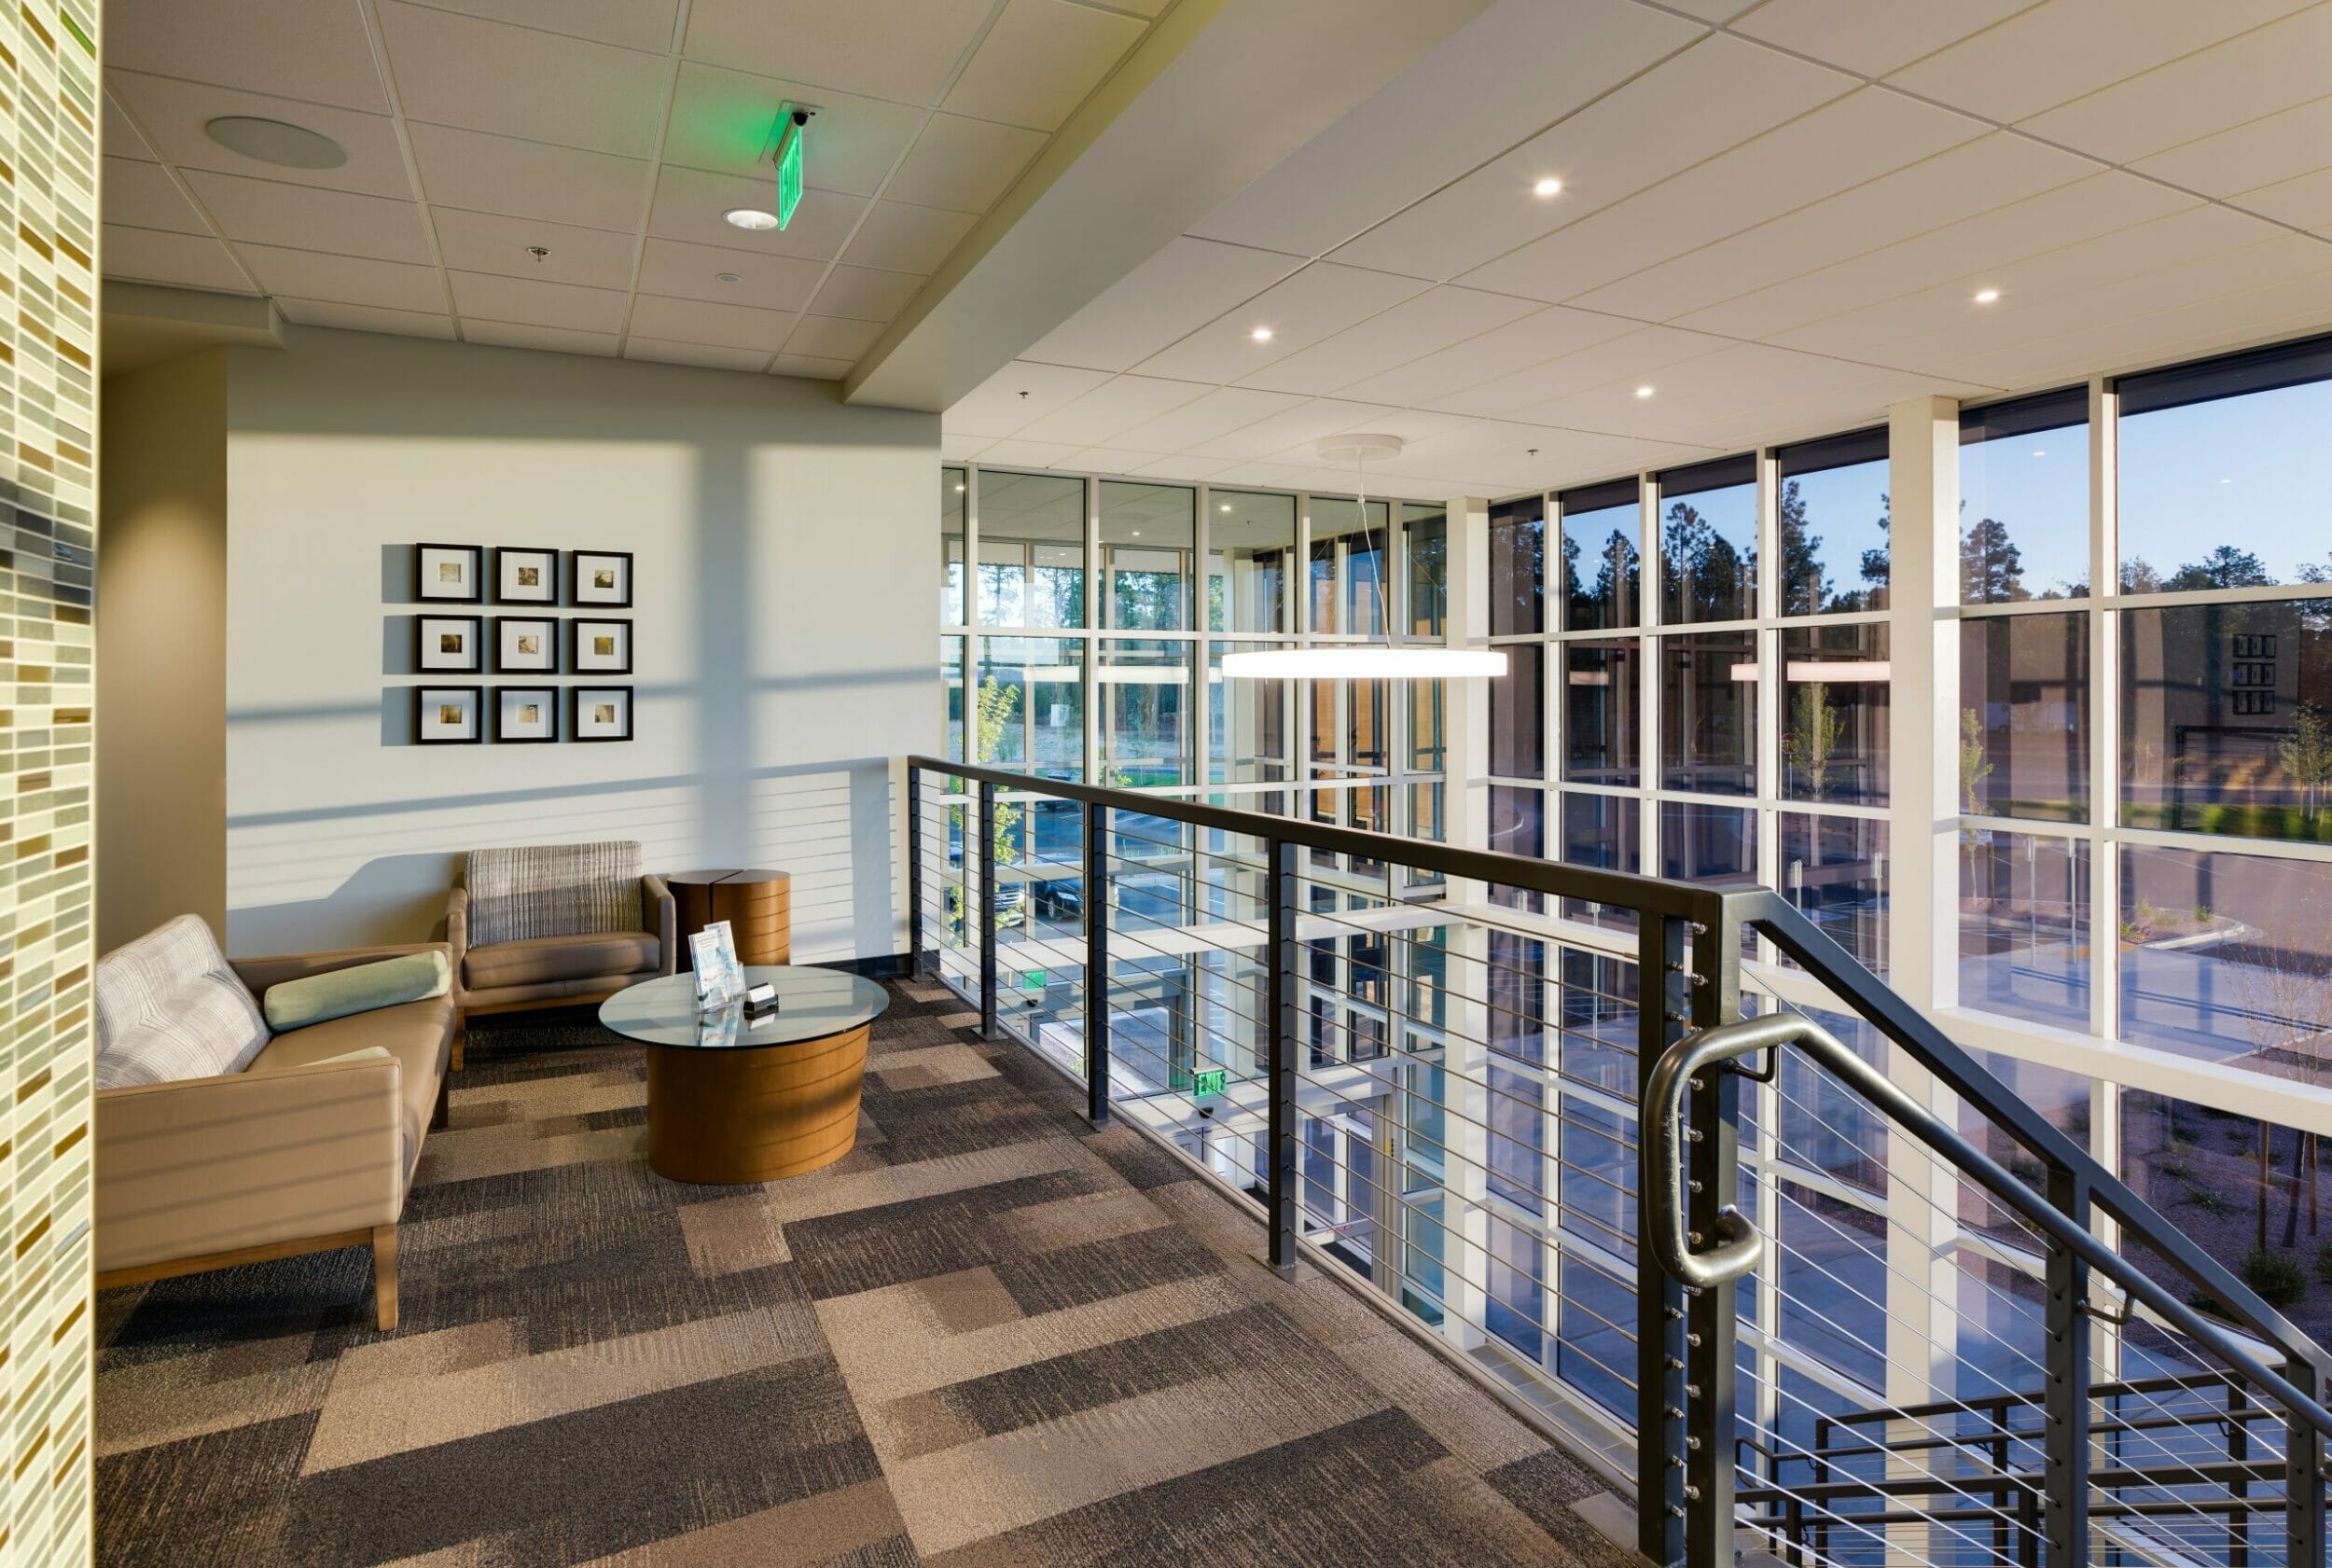 medical office building upper level seating/waiting area, open loft over looking glass atrium